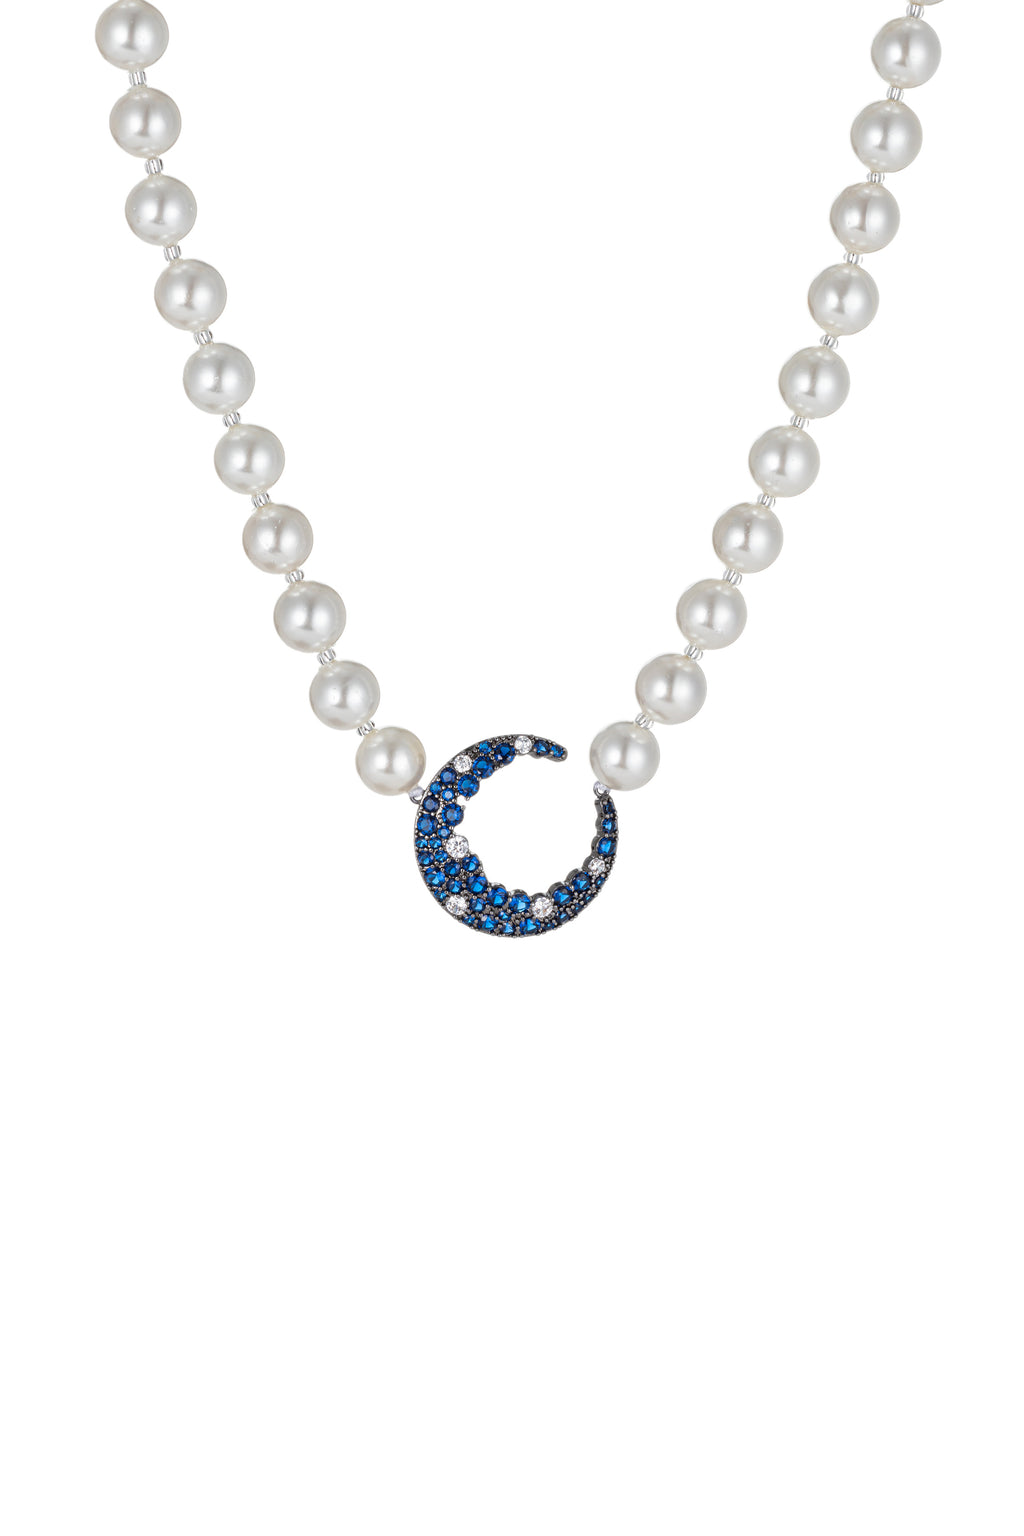 Shell pearl strand necklace with a blue moon pendant.